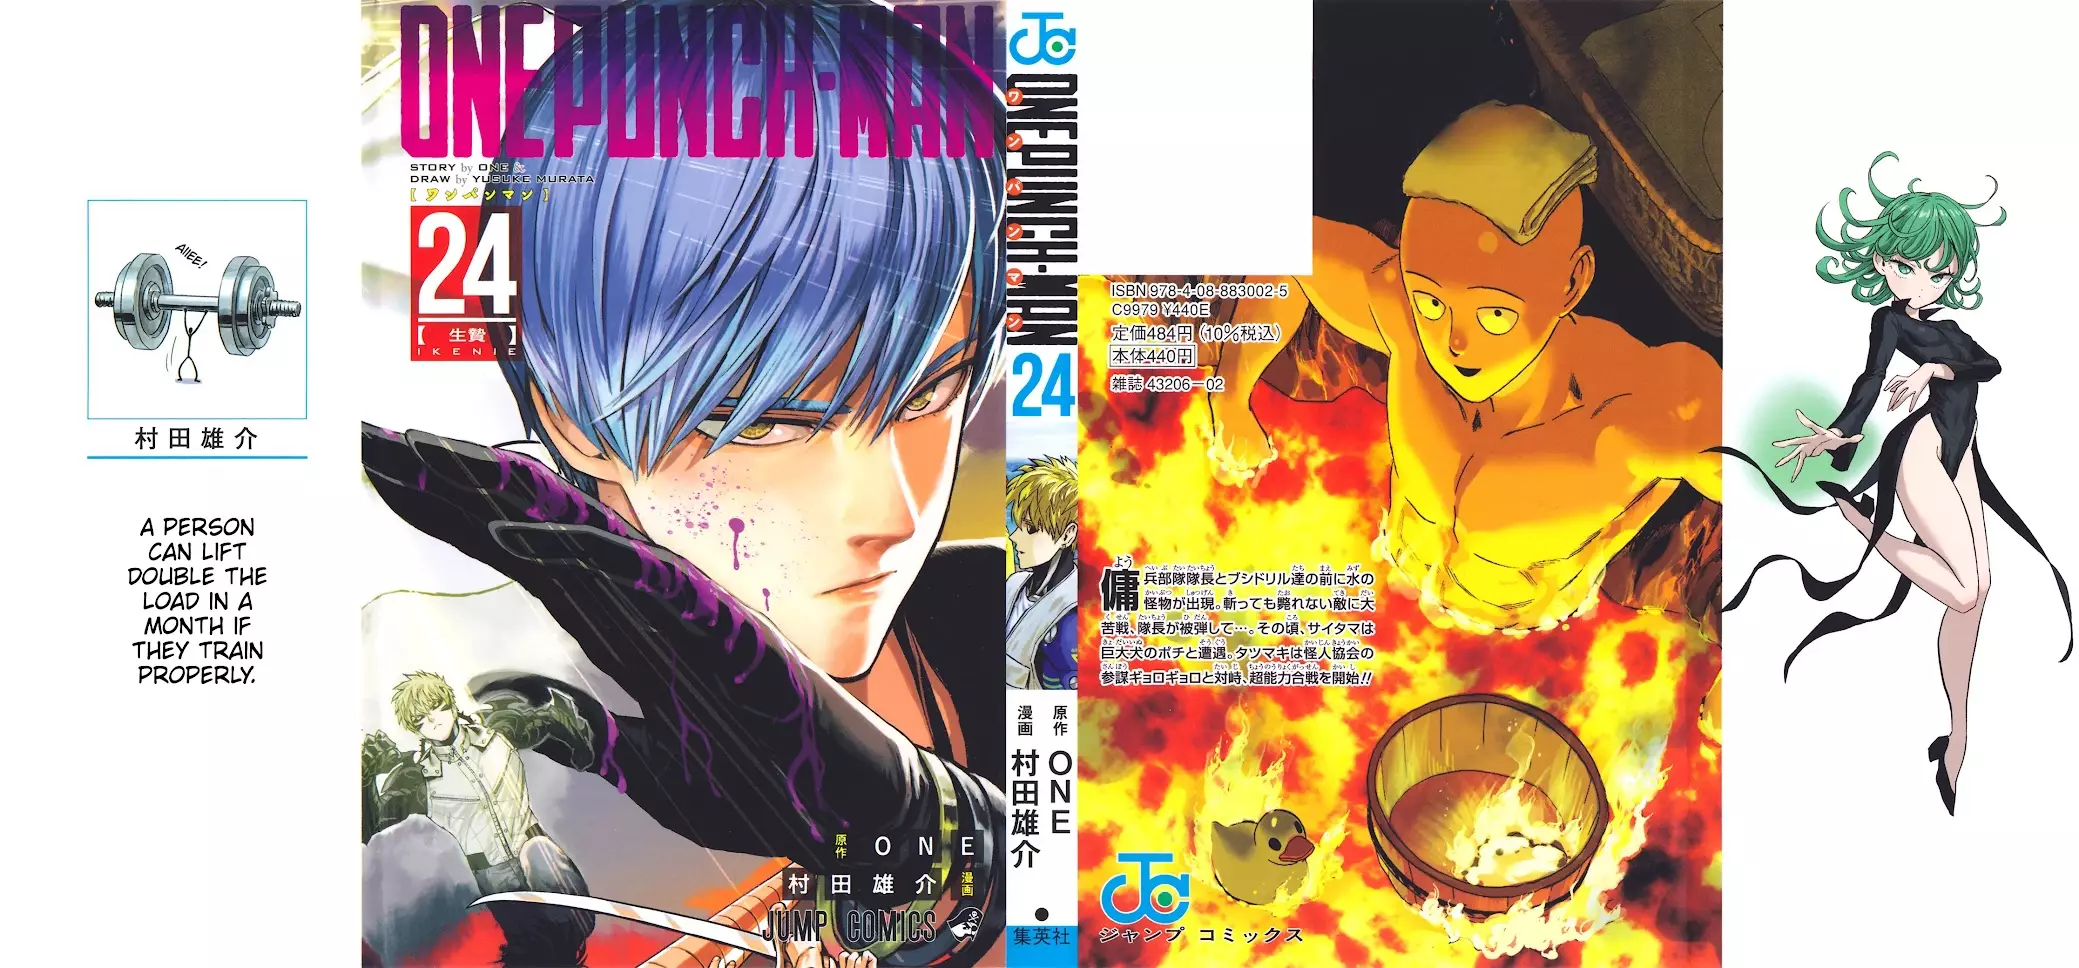 One Punch Man Chapter 154.6, READ One Punch Man Chapter 154.6 ONLINE, lost in the cloud genre,lost in the cloud gif,lost in the cloud girl,lost in the cloud goods,lost in the cloud goodreads,lost in the cloud,lost ark cloud gaming,lost odyssey cloud gaming,lost in the cloud fanart,lost in the cloud fanfic,lost in the cloud fandom,lost in the cloud first kiss,lost in the cloud font,lost in the cloud ending,lost in the cloud episode 97,lost in the cloud edit,lost in the cloud explained,lost in the cloud dog,lost in the cloud discord server,lost in the cloud desktop wallpaper,lost in the cloud drawing,can't find my cloud on network,lost in the cloud characters,lost in the cloud chapter 93 release date,lost in the cloud birthday,lost in the cloud birthday art,lost in the cloud background,lost in the cloud banner,lost in the clouds meaning,what is the black cloud in lost,lost in the cloud ao3,lost in the cloud anime,lost in the cloud art,lost in the cloud author twitter,lost in the cloud author instagram,lost in the cloud artist,lost in the cloud acrylic stand,lost in the cloud artist twitter,lost in the cloud art style,lost in the cloud analysis